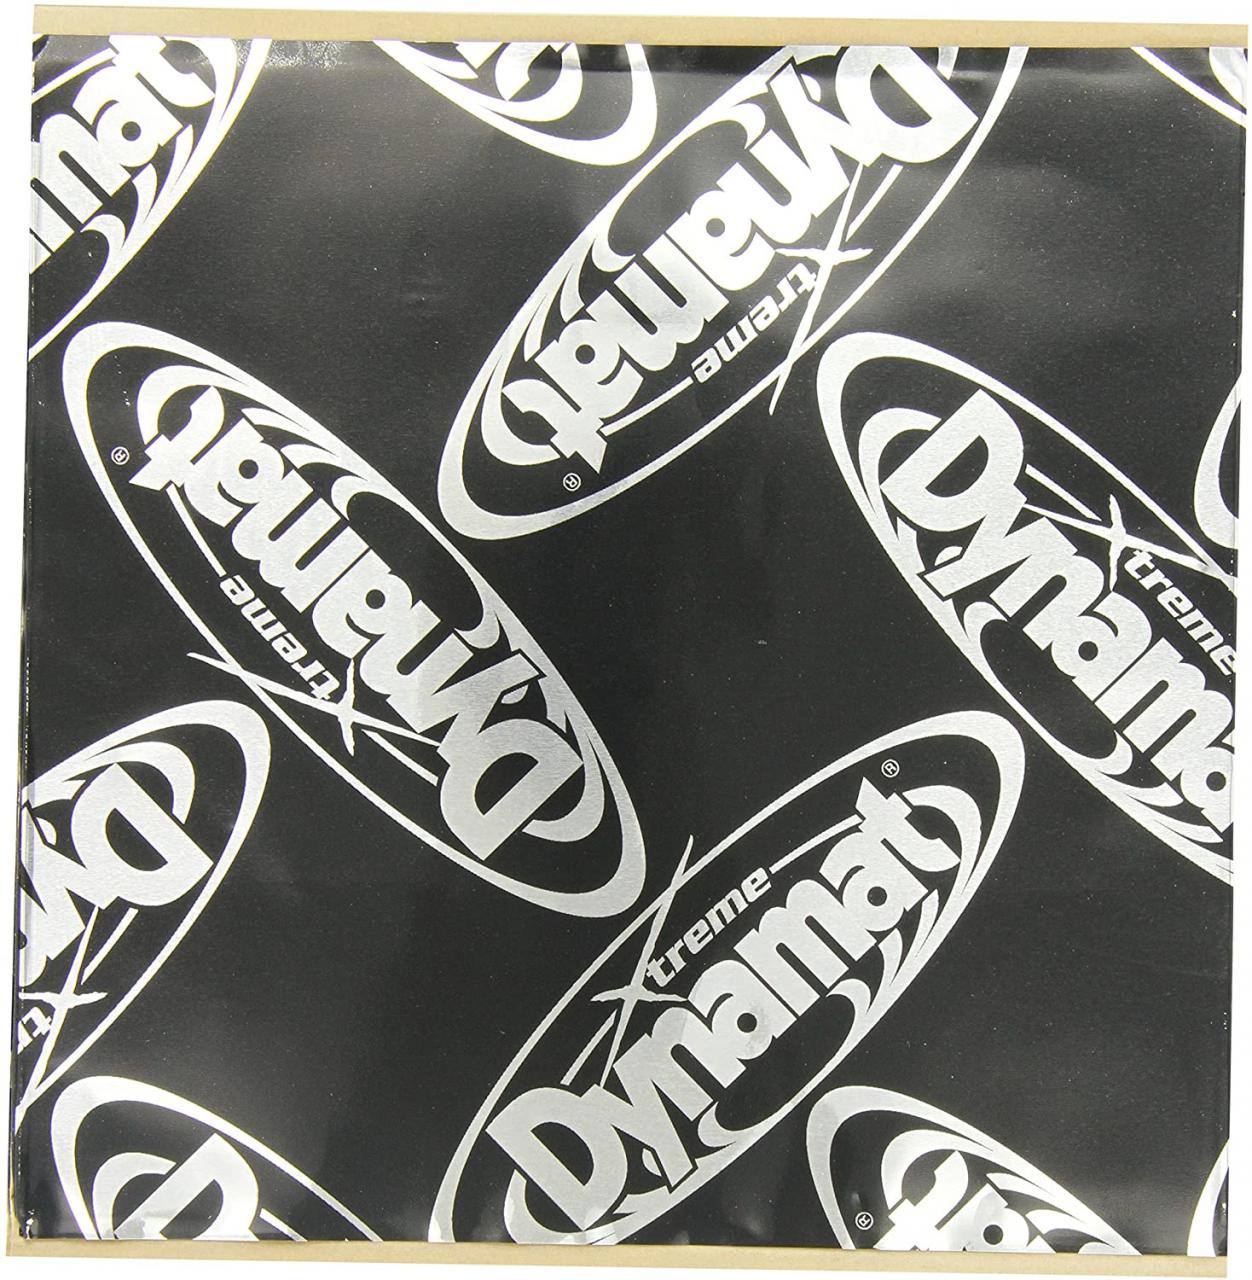 Buy Dynamat 10425 18 x 32 x 0.067 Thick Self-Adhesive Sound Deadener with  Xtreme Wedge Pack, Black Online in Taiwan. B00020CAVA